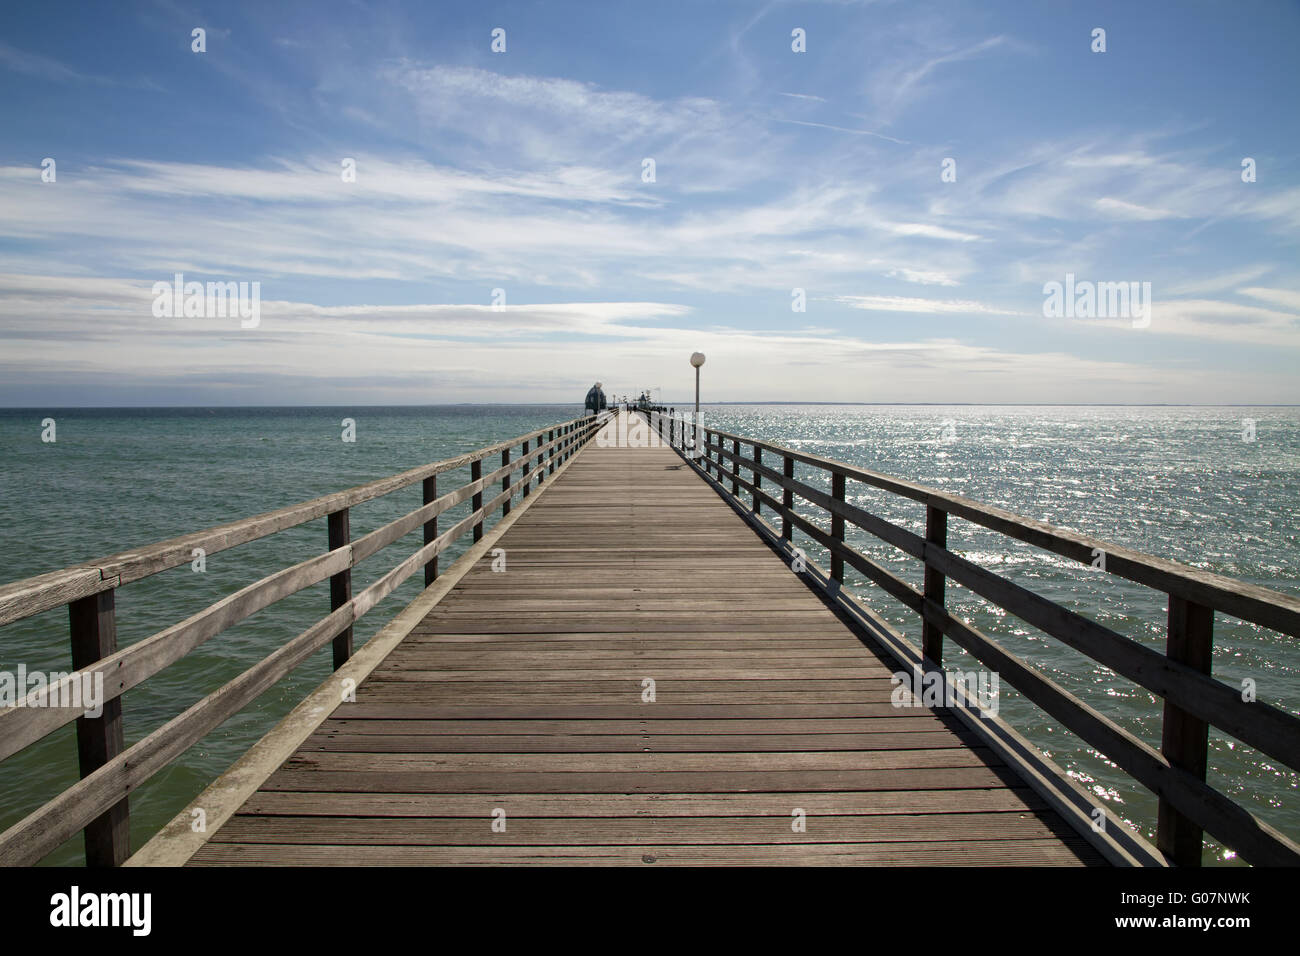 The landing stage. Germany Stock Photo